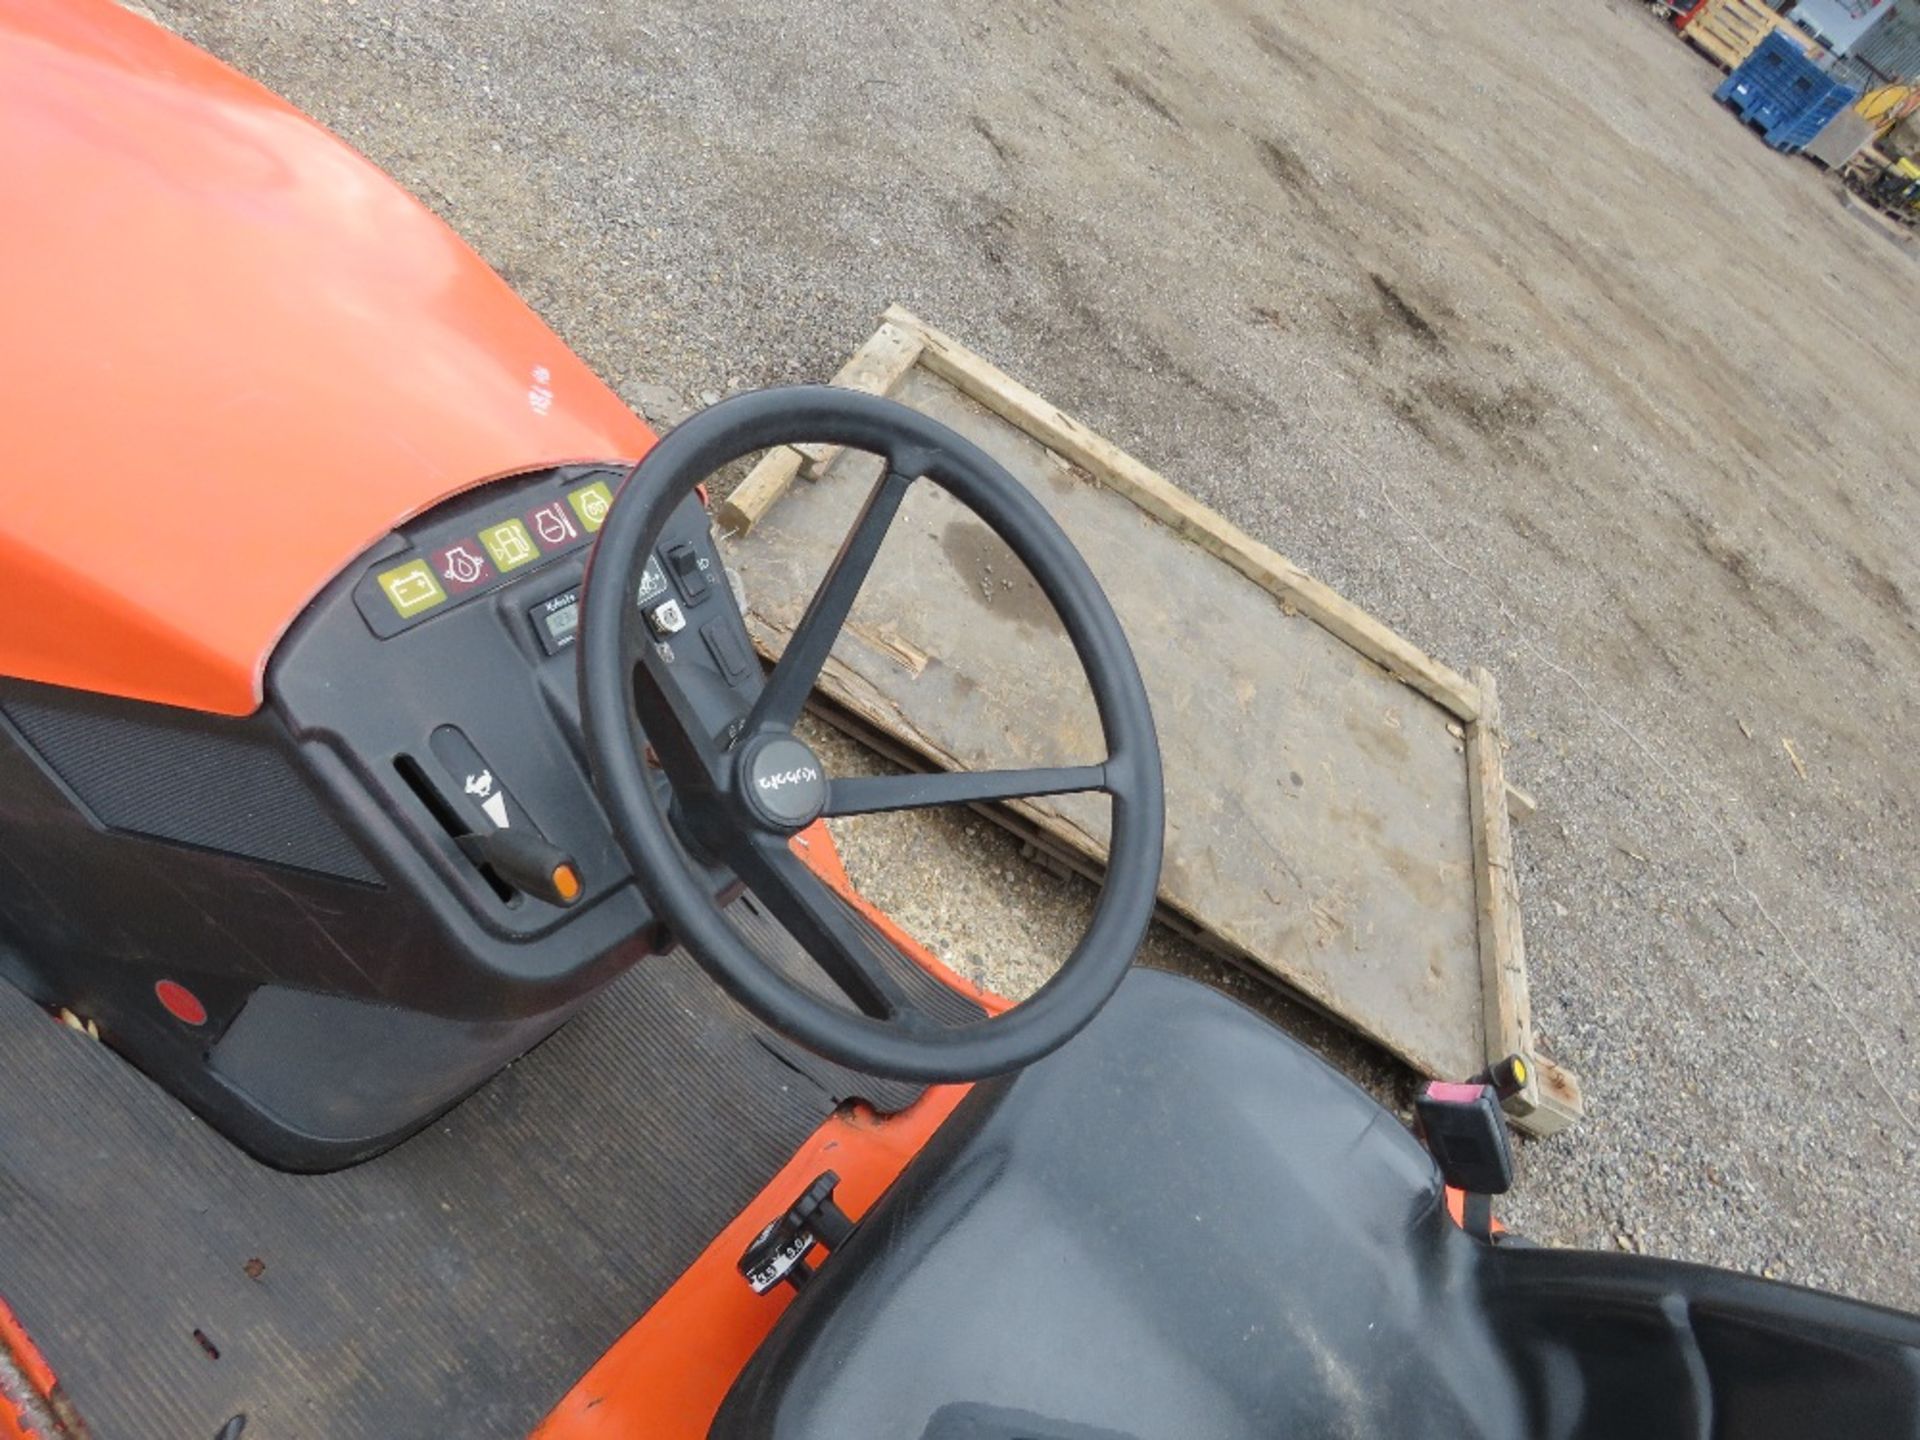 KUBOTA G21E RIDE ON MOWER WITH HIGH DISCHARGE COLLECTOR, YEAR 2014. WHEN TESTED WAS SEEN TO RUN, DRI - Image 4 of 7